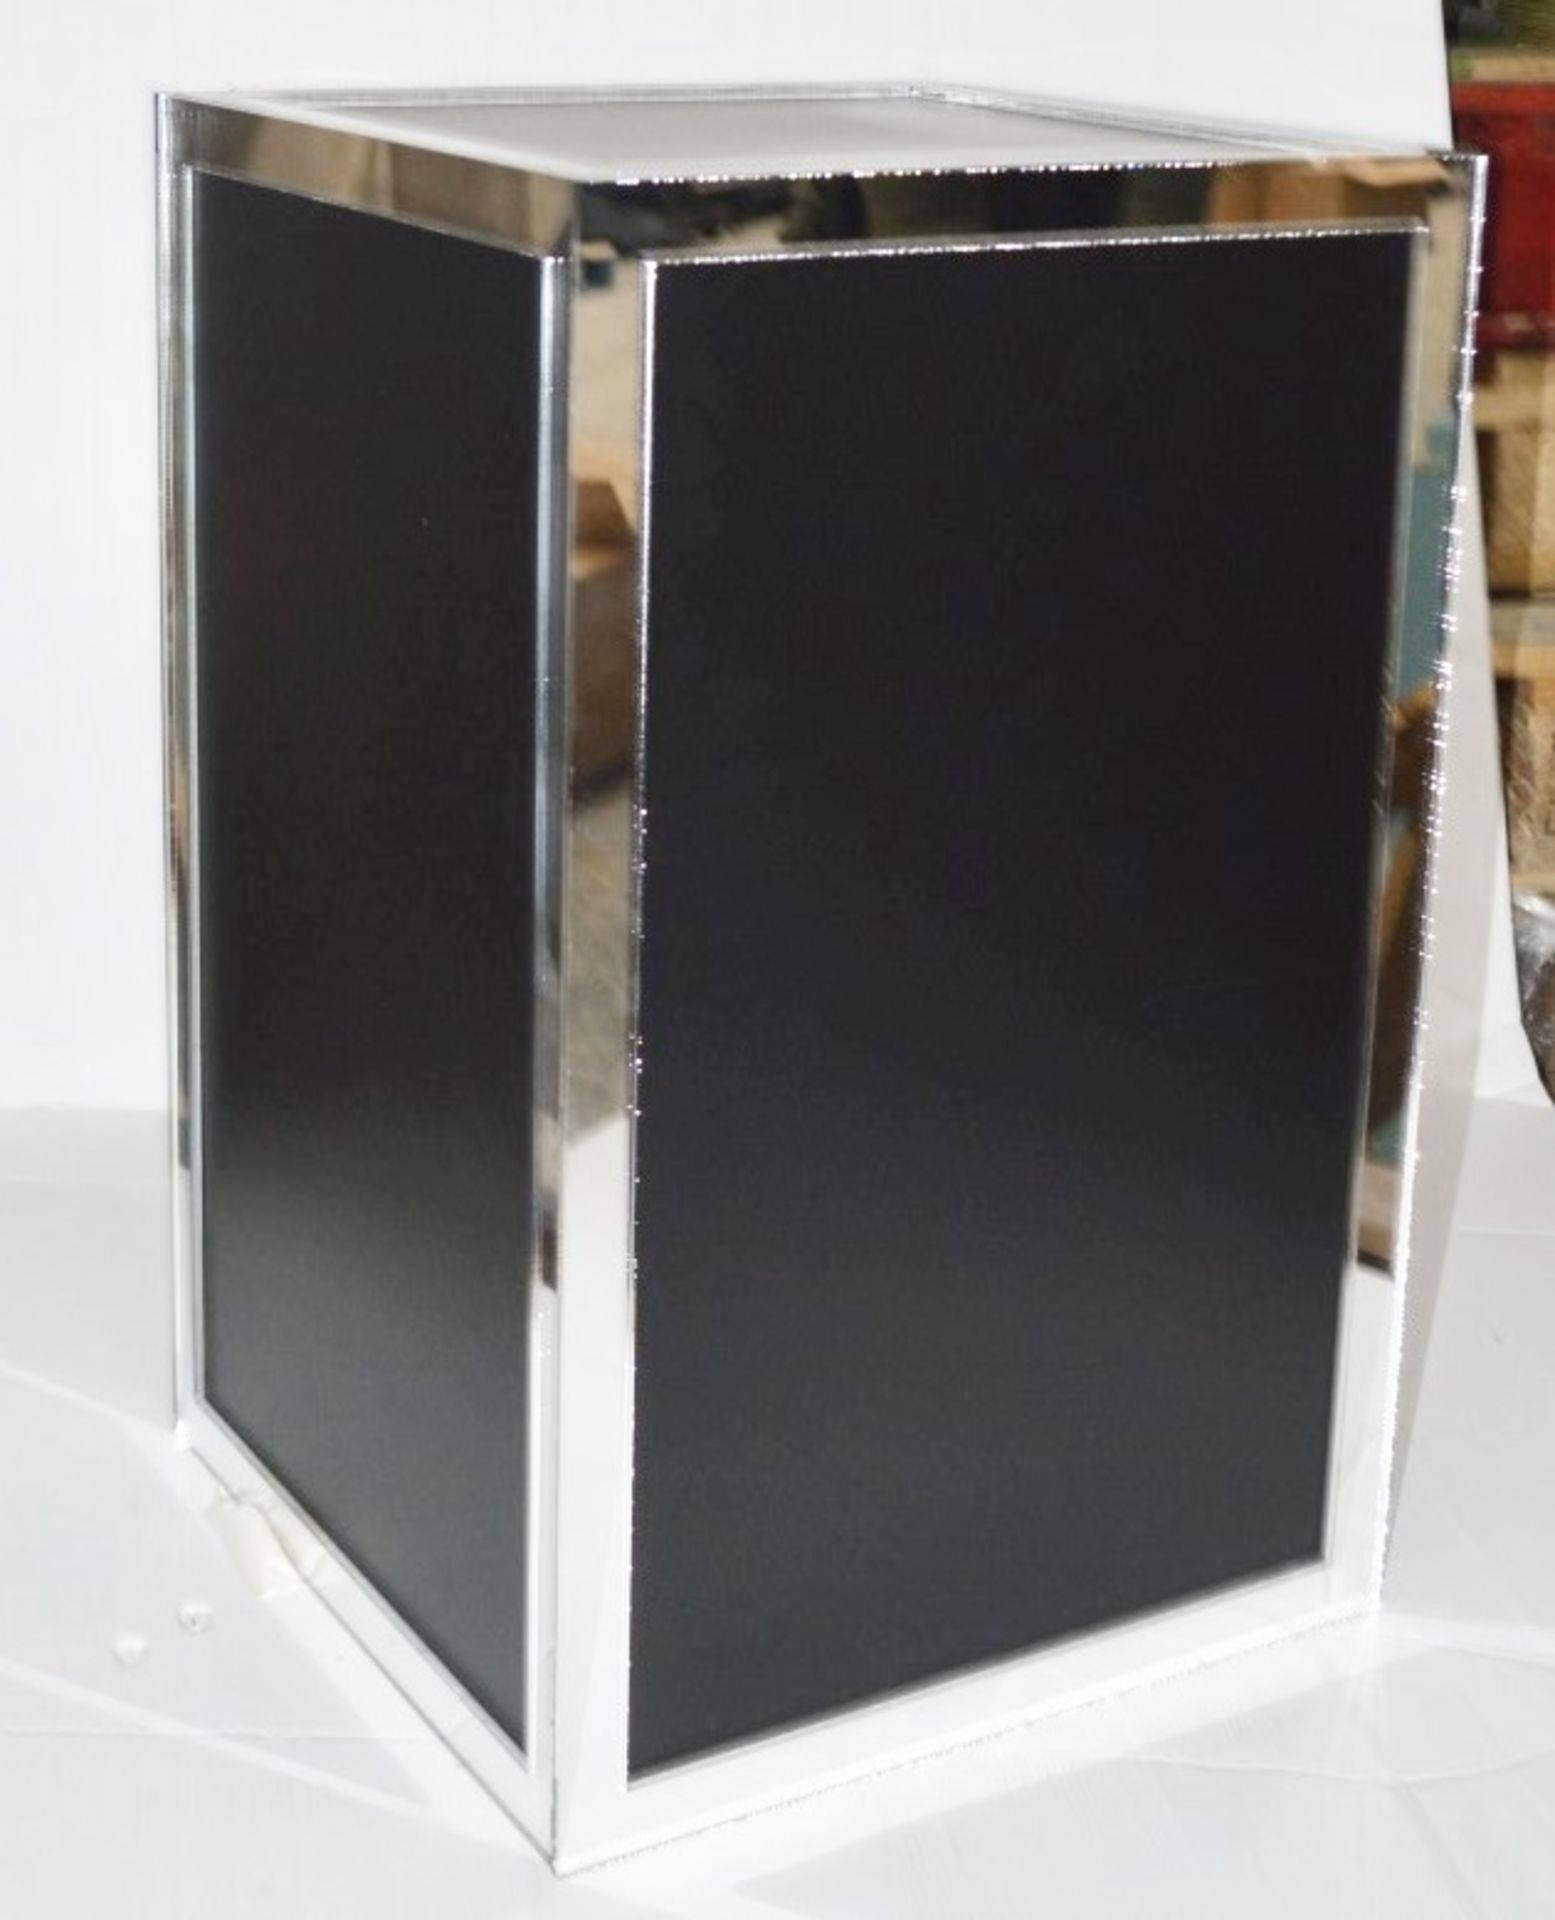 2 x Bank Vault Safe-style Shop Display Dumy Props In Black With Mirrored Decoration - Image 5 of 5